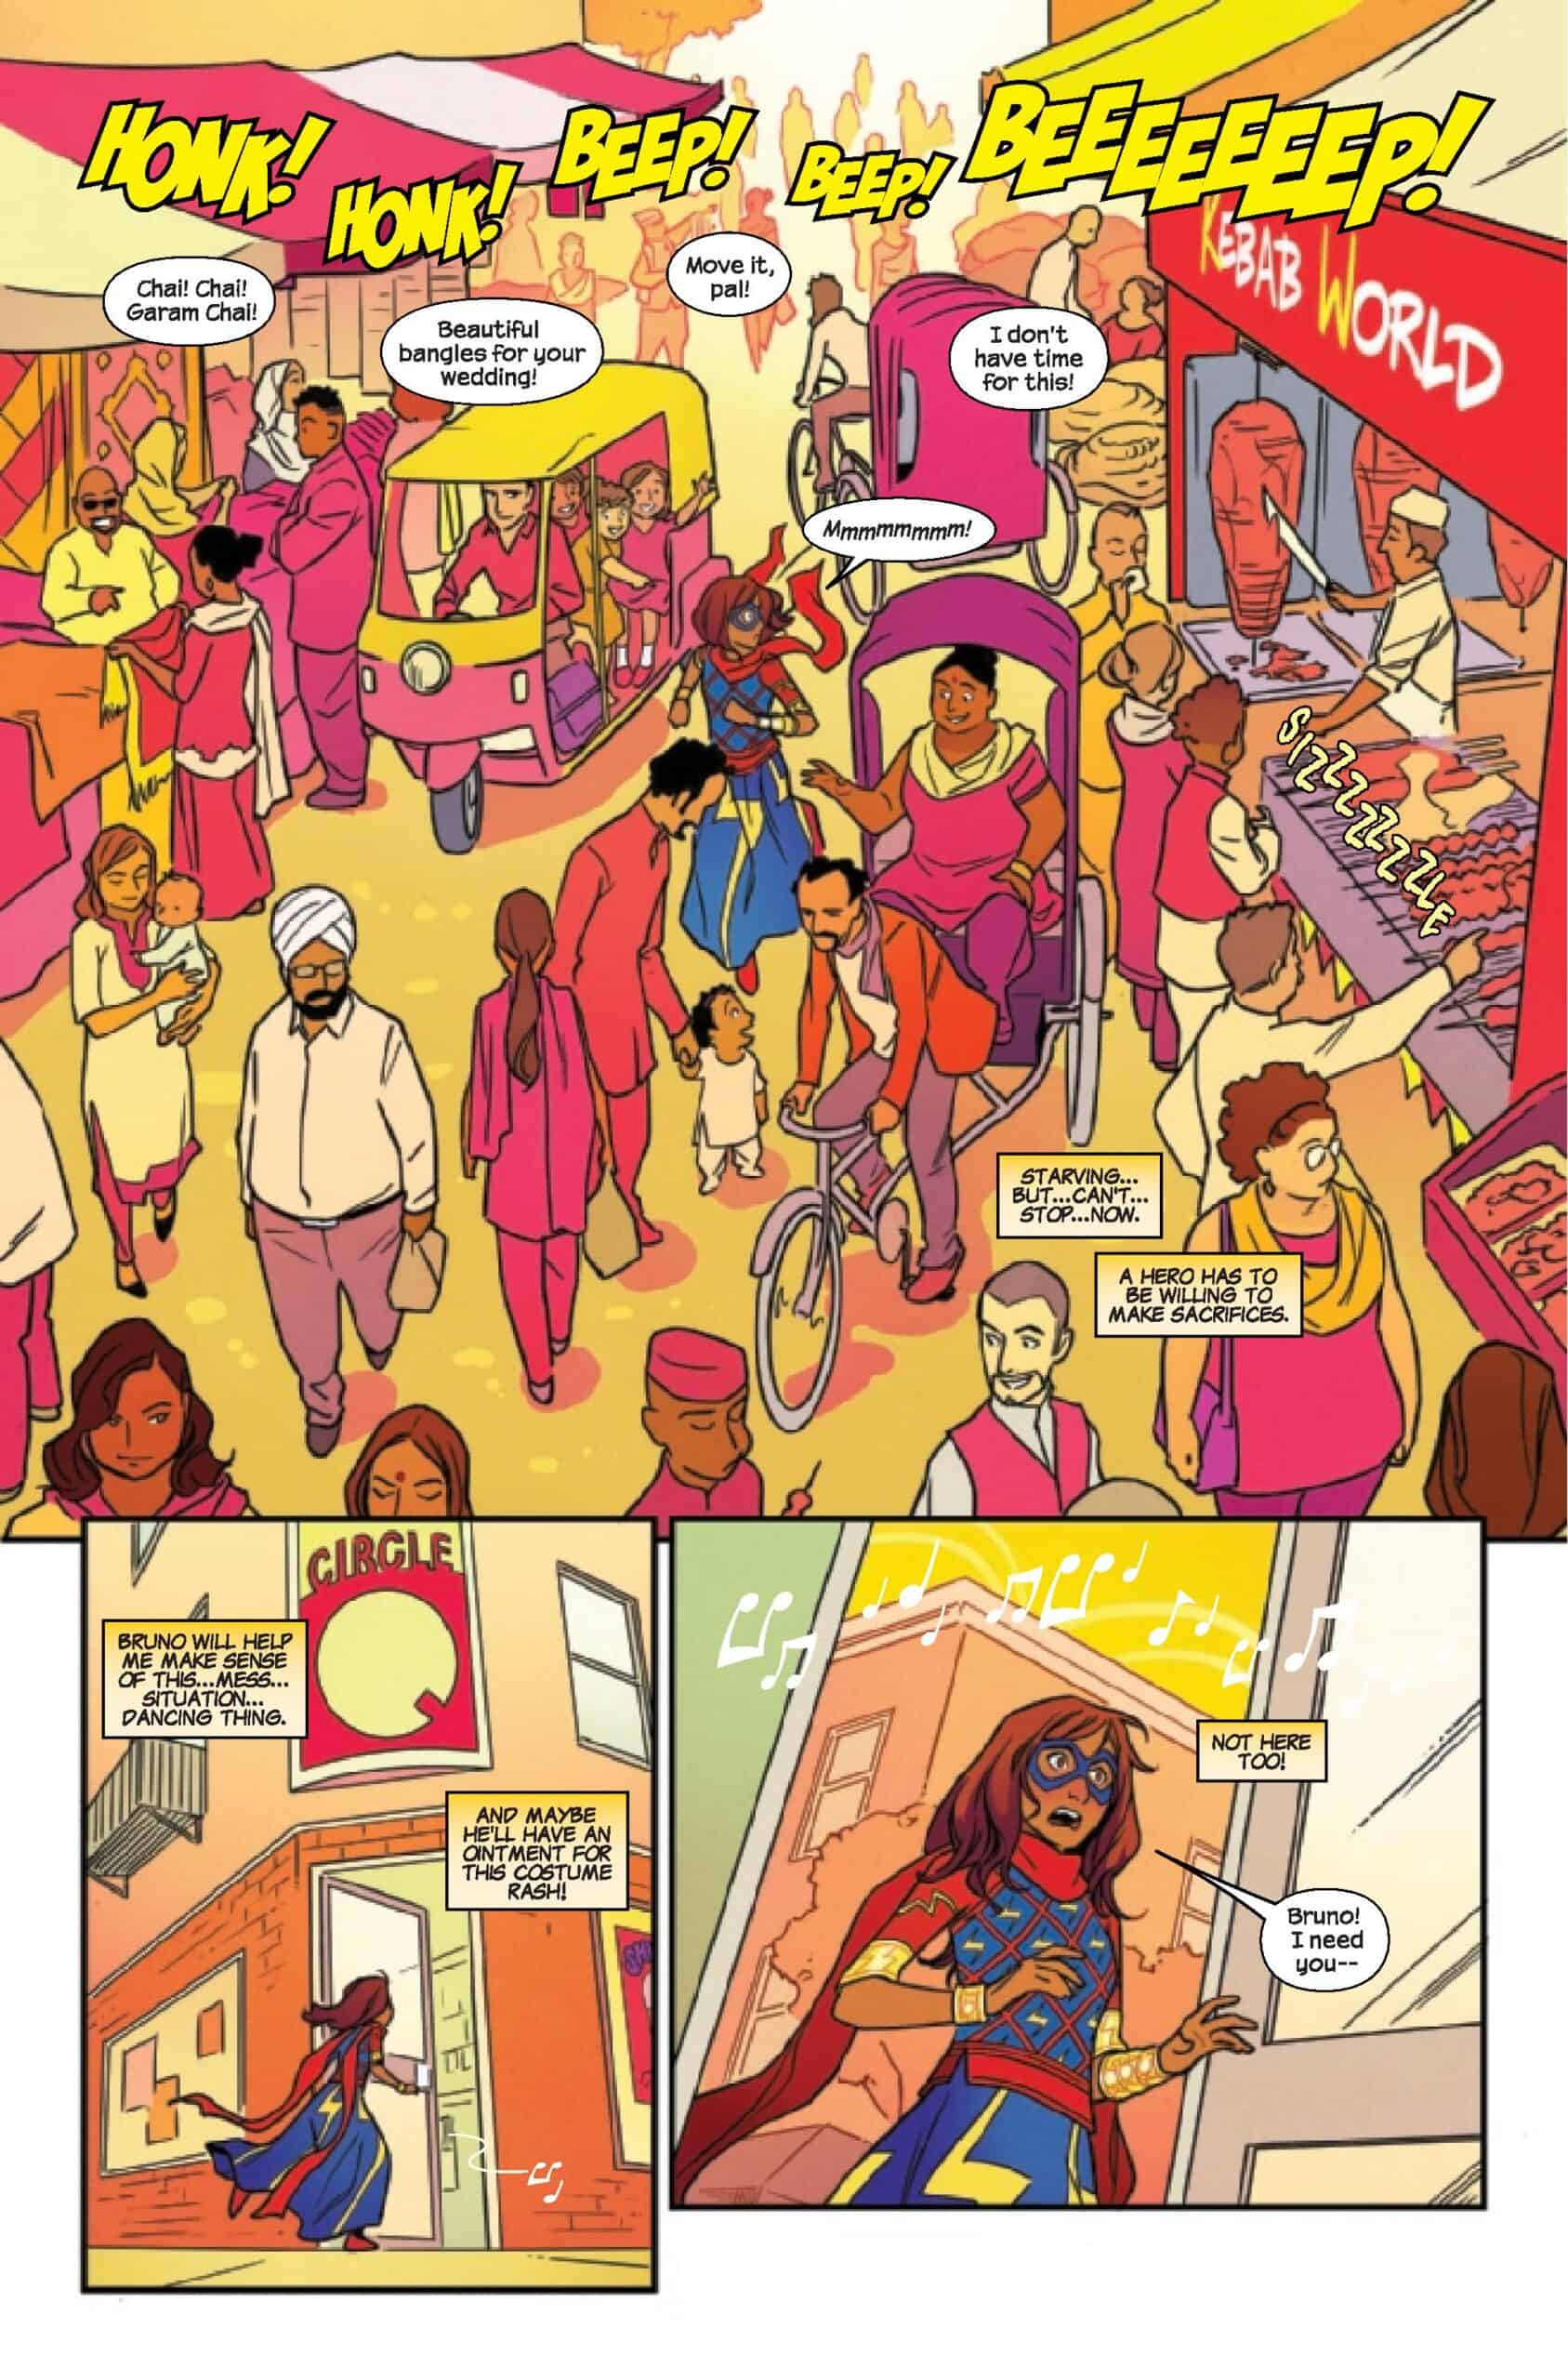 SNEAK PEEK: Preview of Marvel's MS MARVEL: BEYOND THE LIMIT #2 - Comic Watch